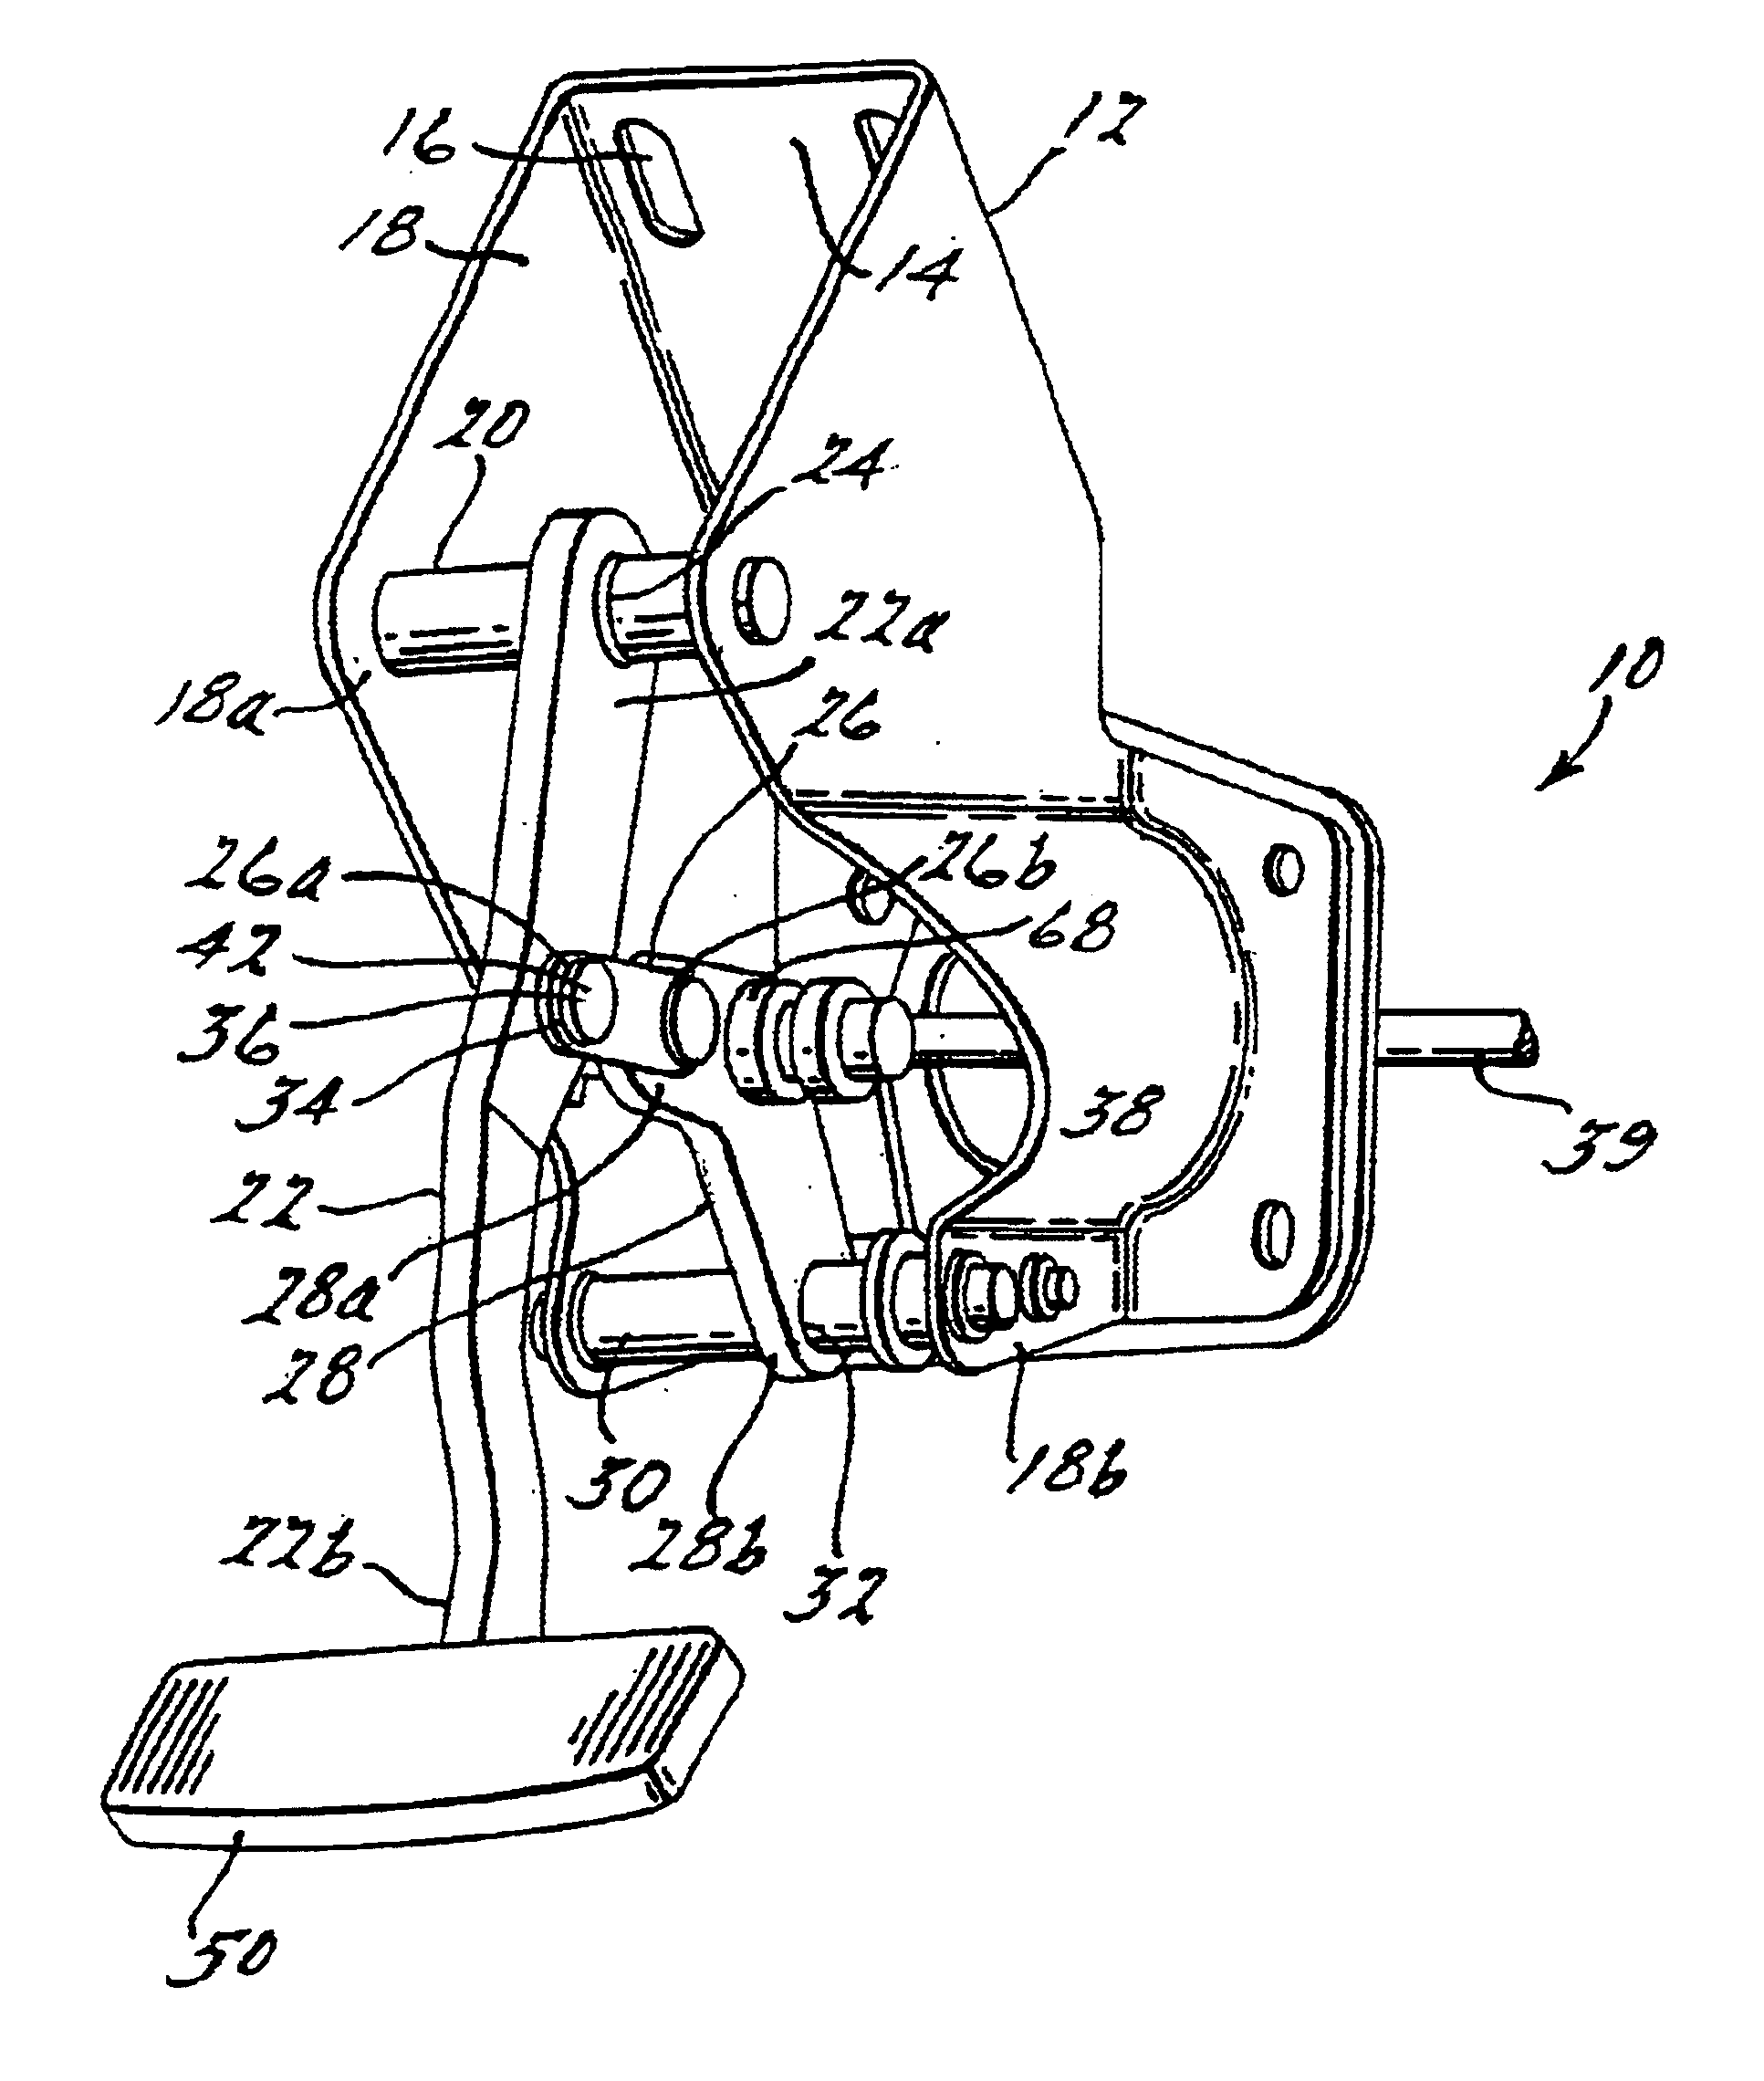 Brake pedal assembly with variable ratio